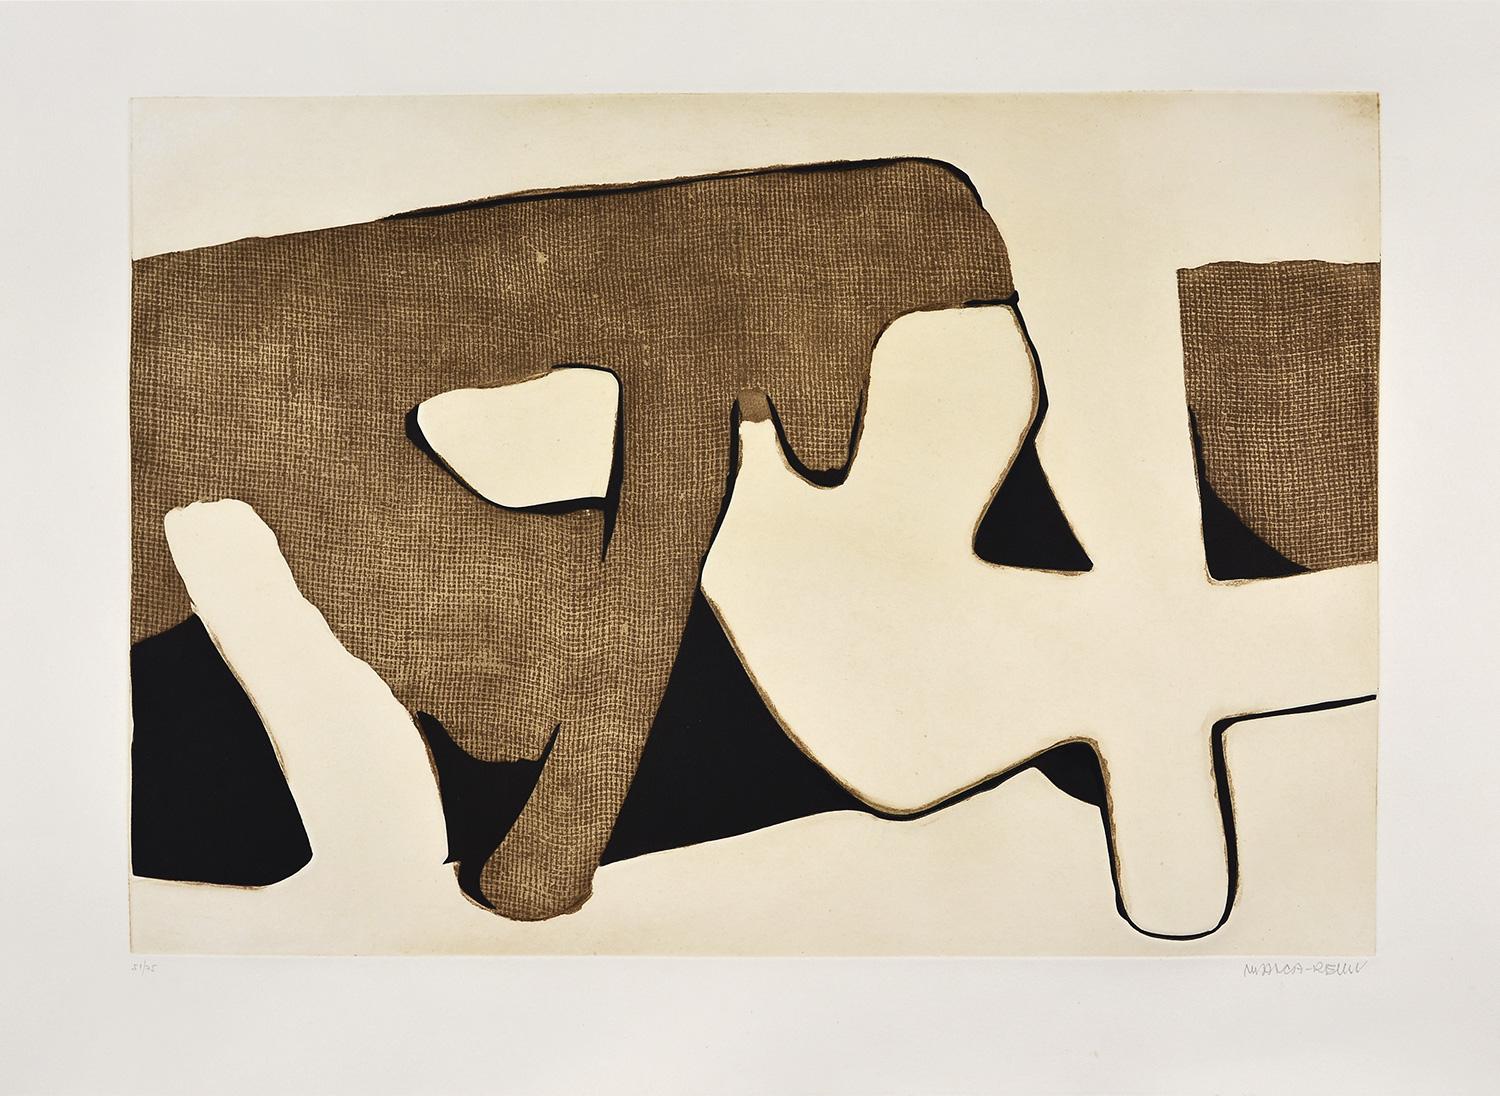 Conrad Marca-Relli - Composition XIV
Date of creation: 1977
Medium: Etching and aquatint on Gvarro paper
Edition number: 51/75
Size: 56 x 76 cm
Condition: In very good conditions and never framed
Observations: Etching and aquatint on Gvarro paper